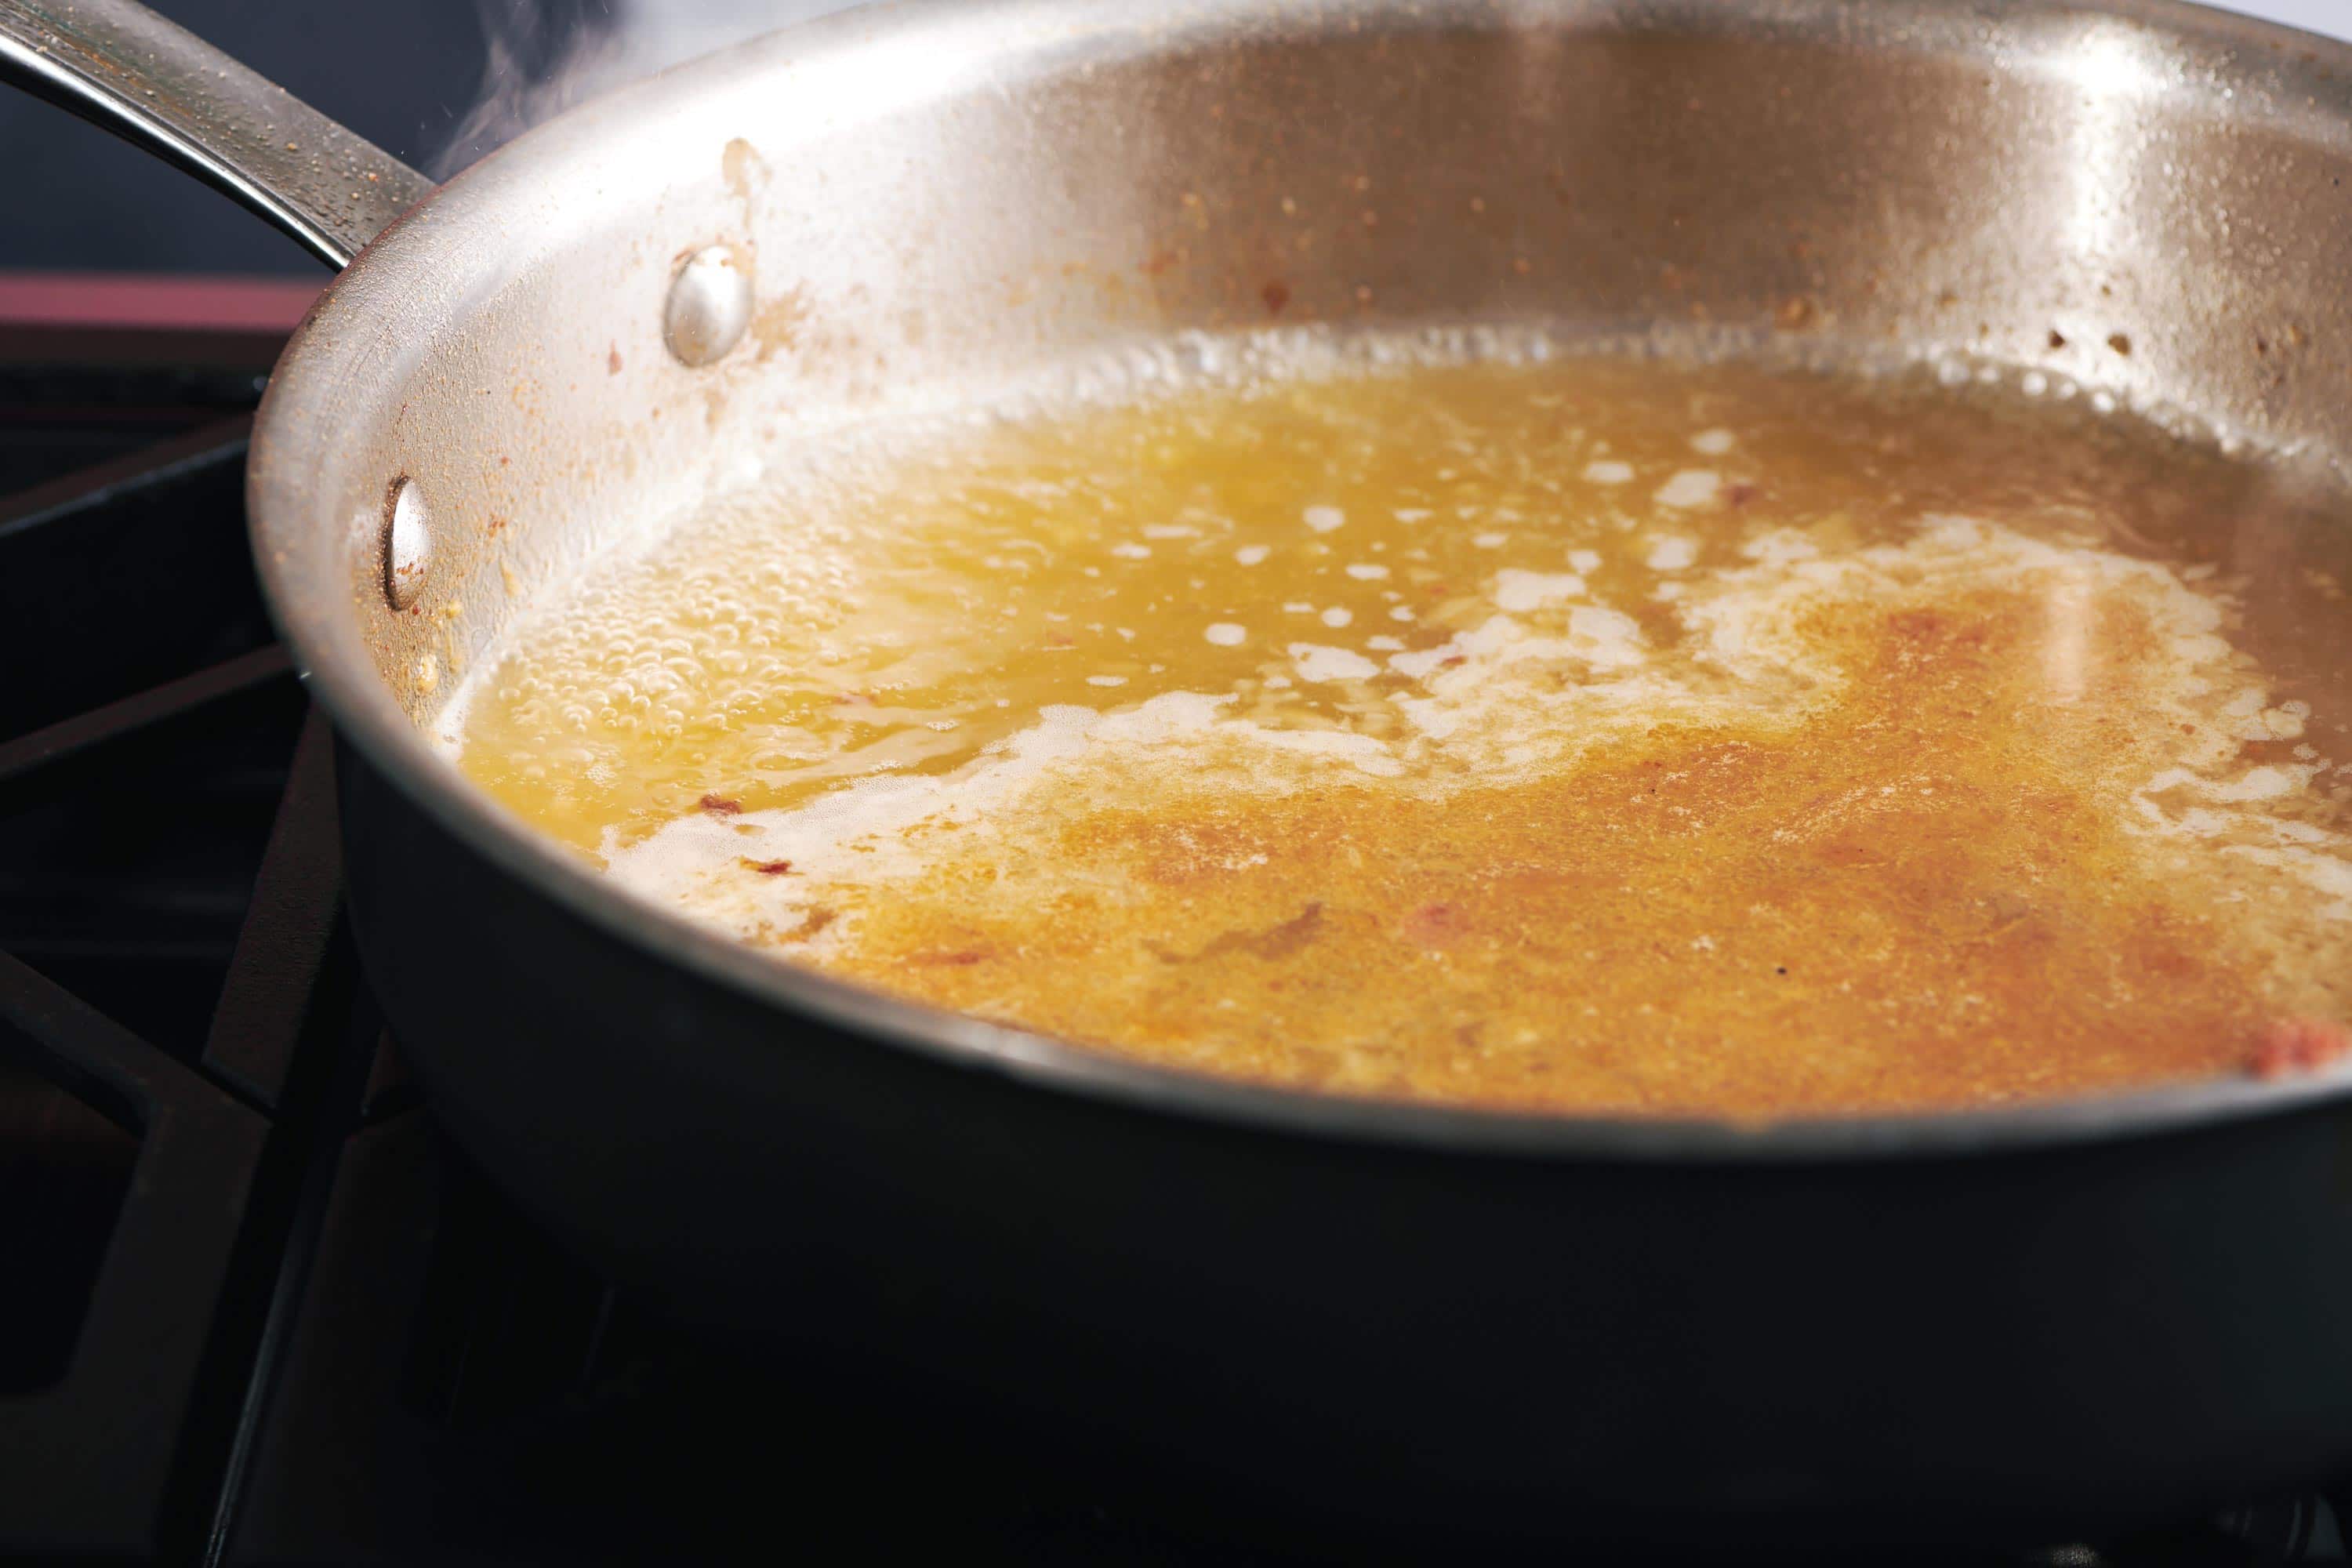 Broth simmering in a skillet.